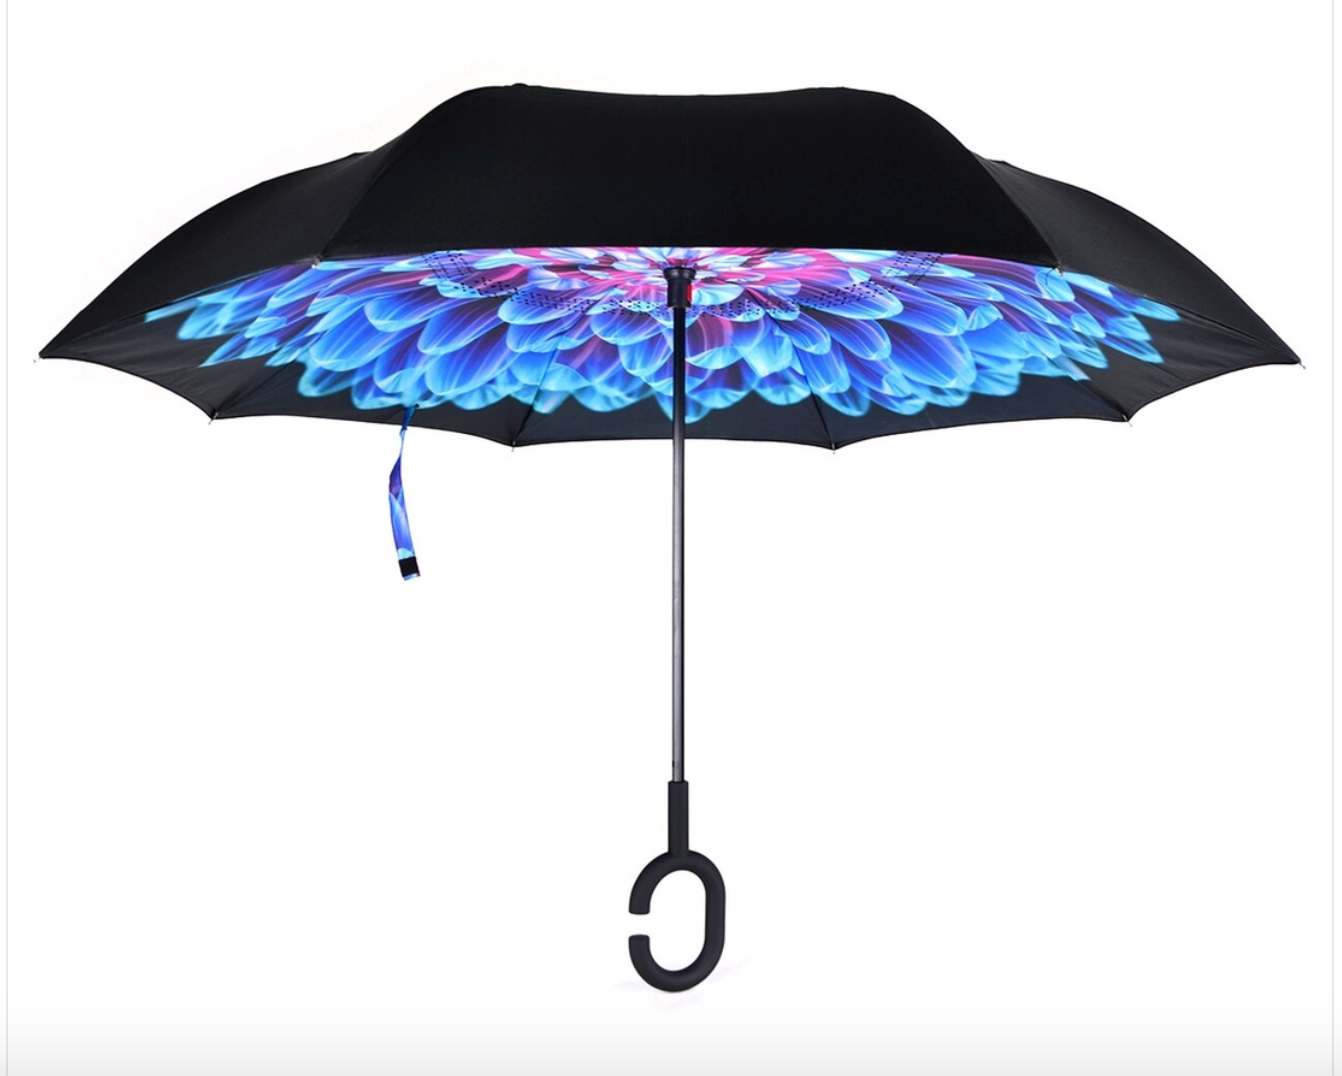 Bright Blue Flower Mosaic Double Layer Inverted Umbrella